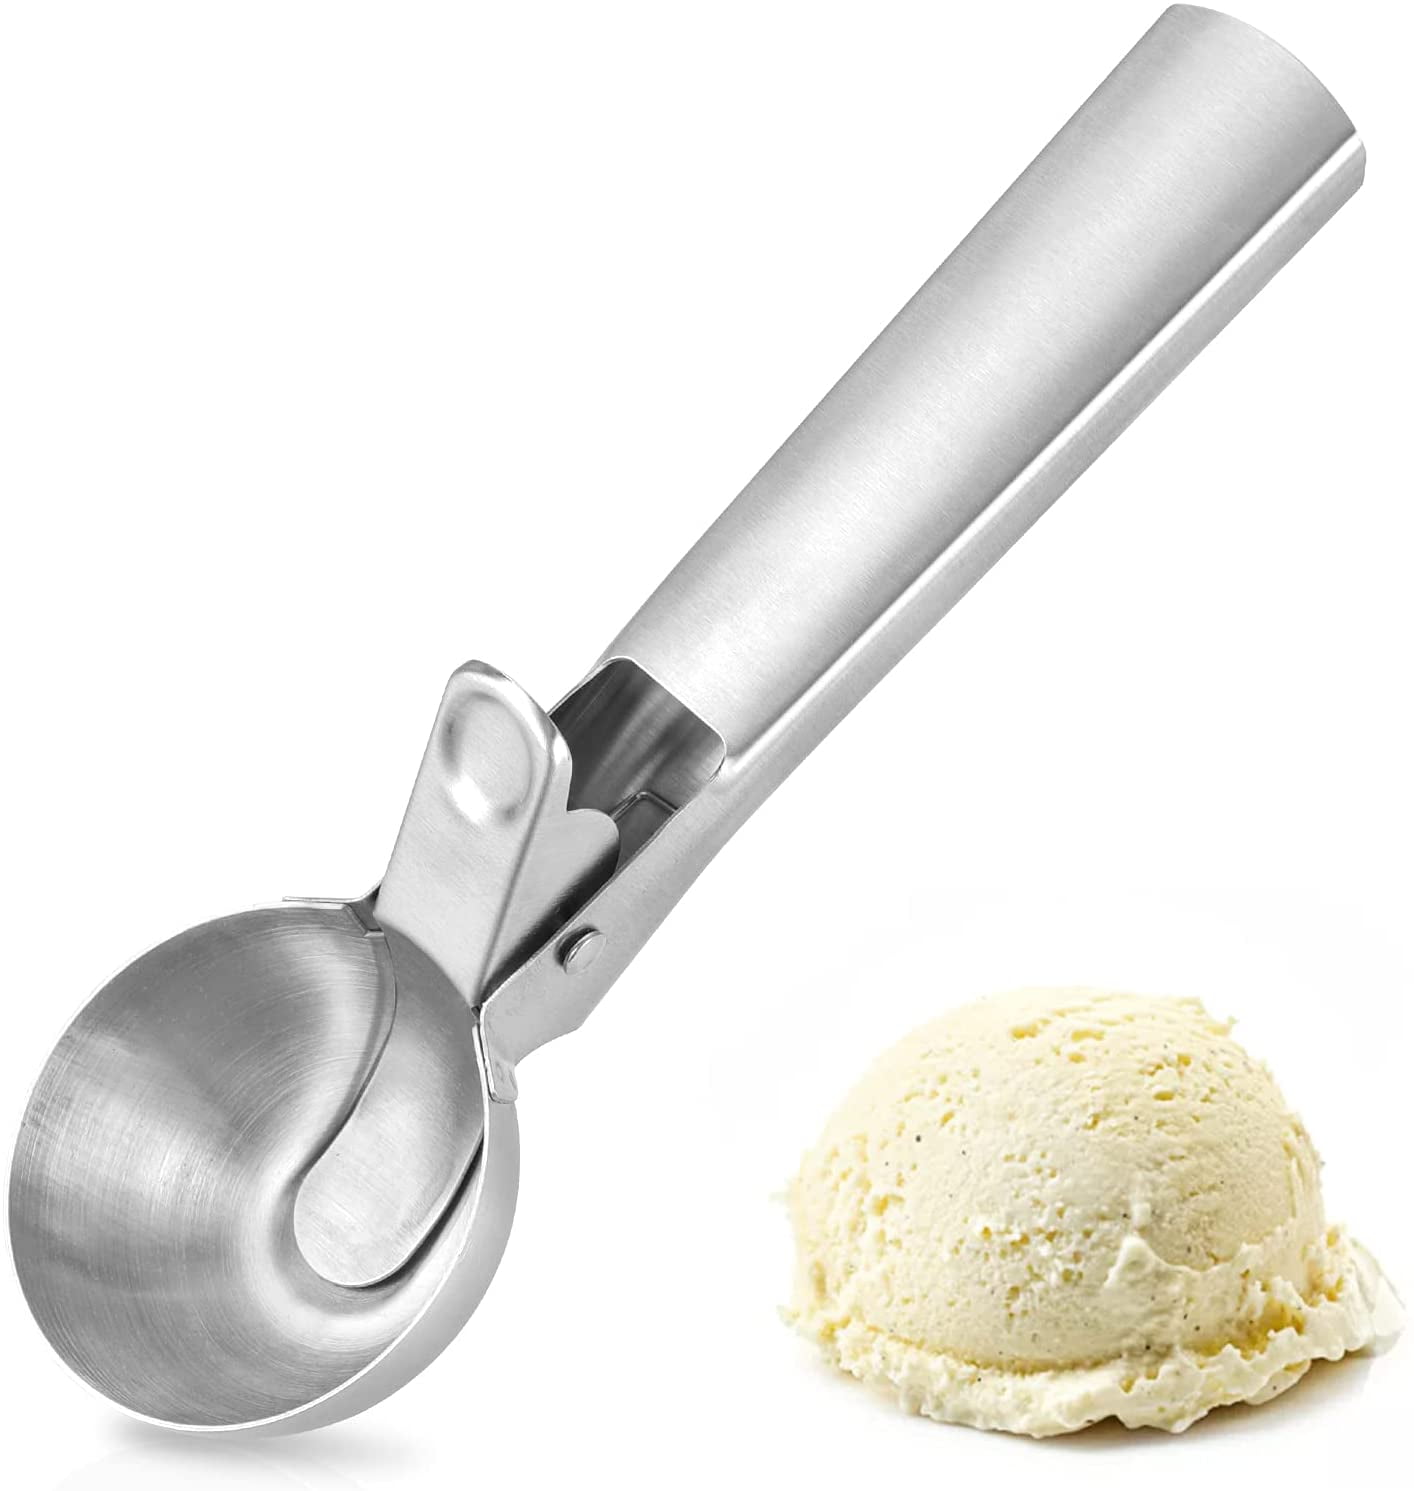 1pc Trigger Release Stainless Steel Ice Cream Scoop - Perfect for